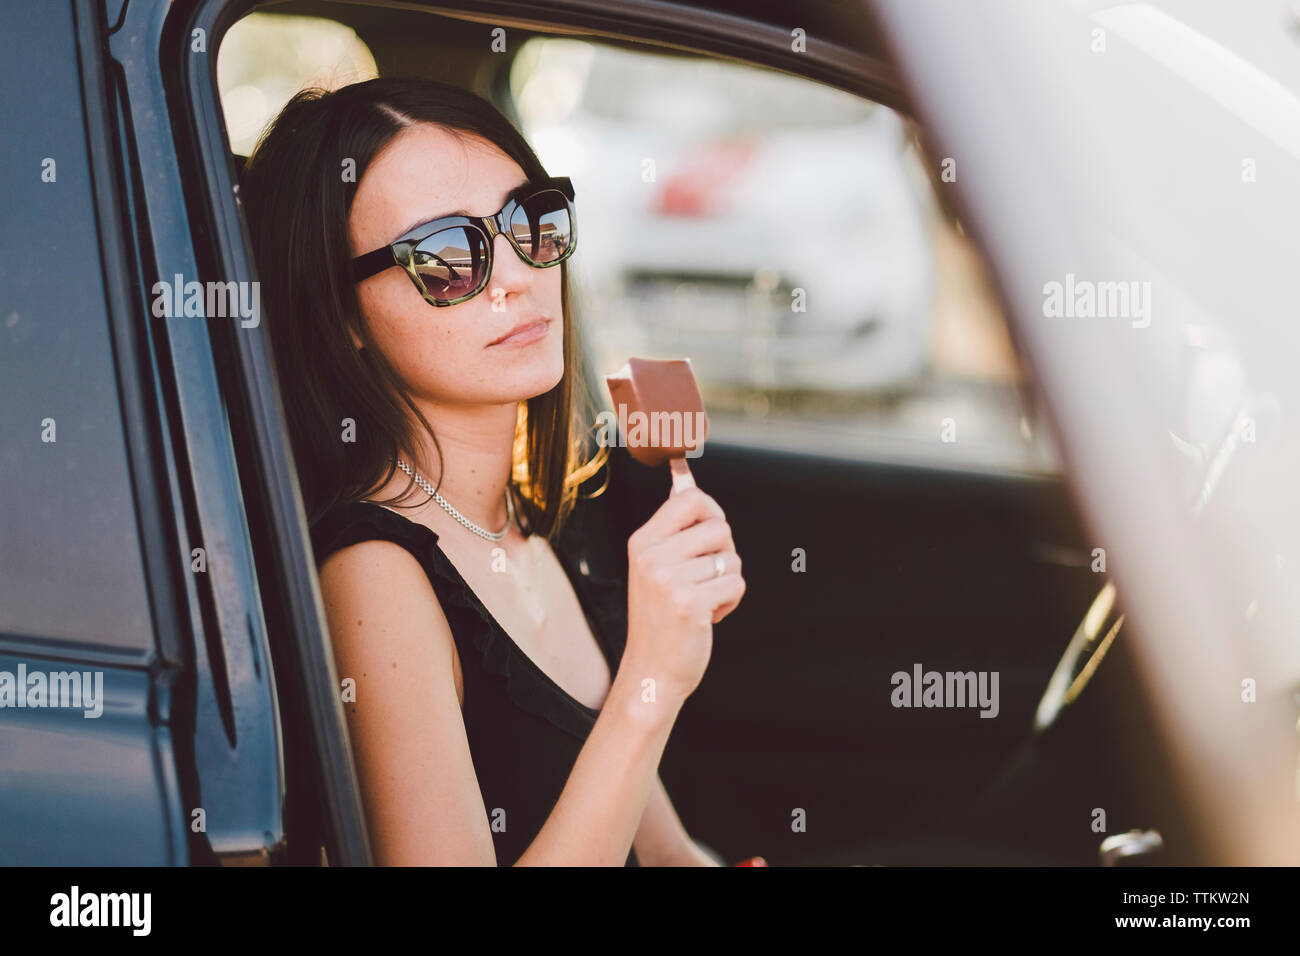 Young woman wearing sunglasses holding frozen sweet food while sitting in car seen through window Stock Photo